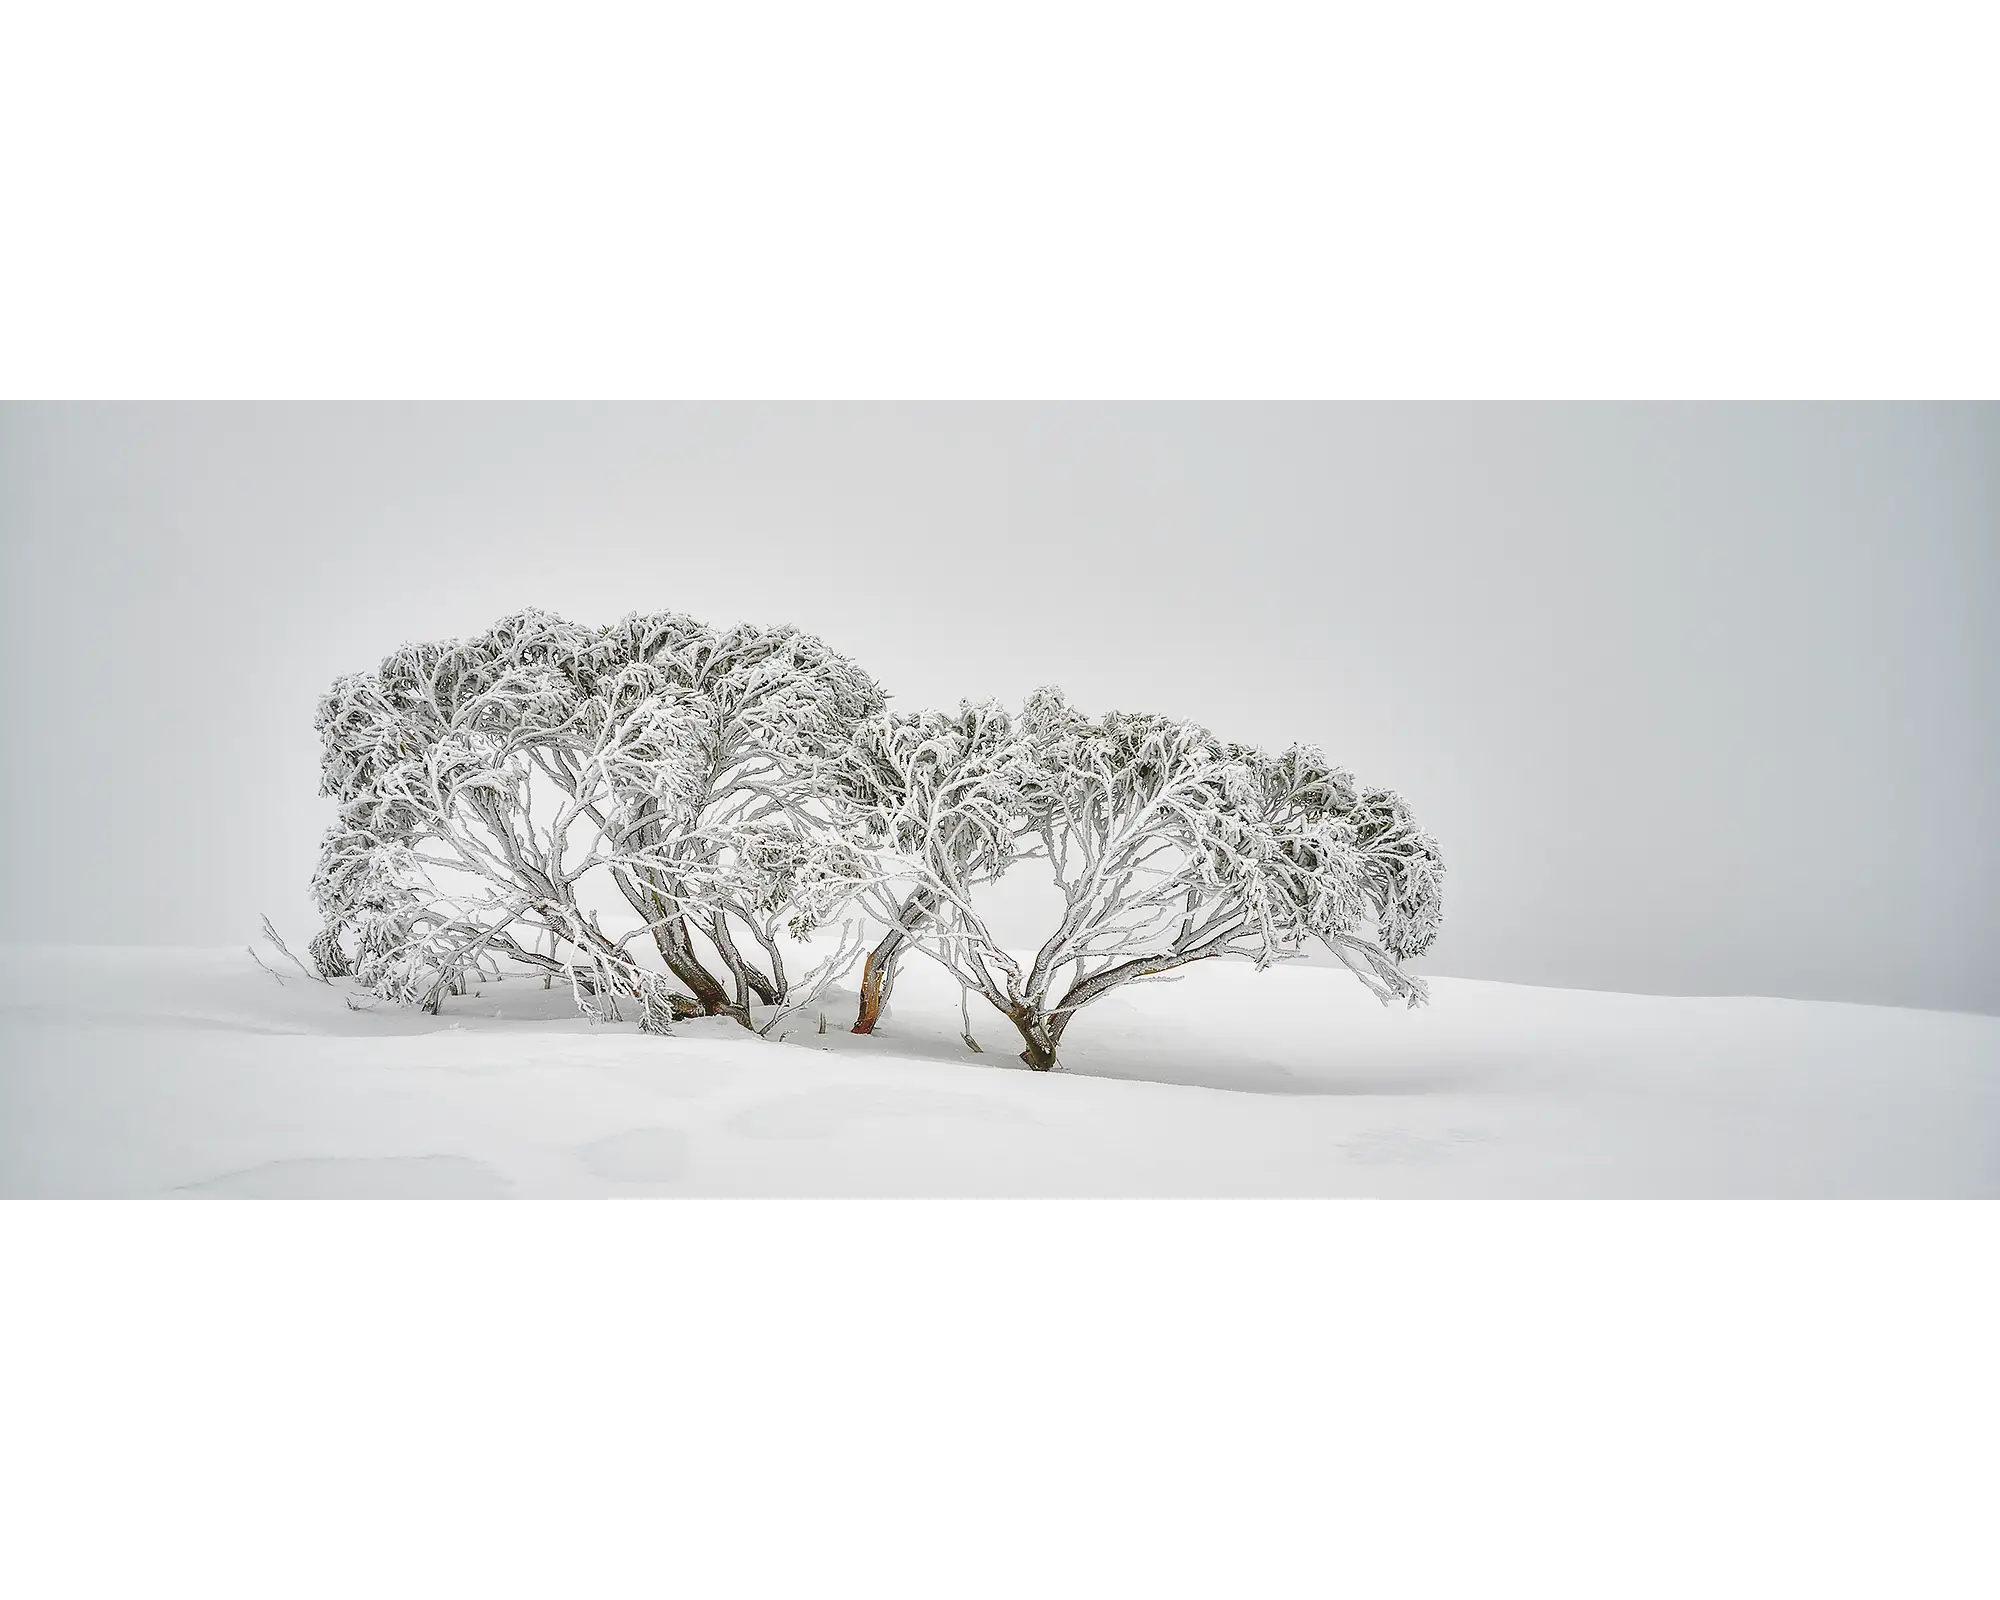 Snow Gum covered in snow, surrounded by fog, on Mount Hotham.